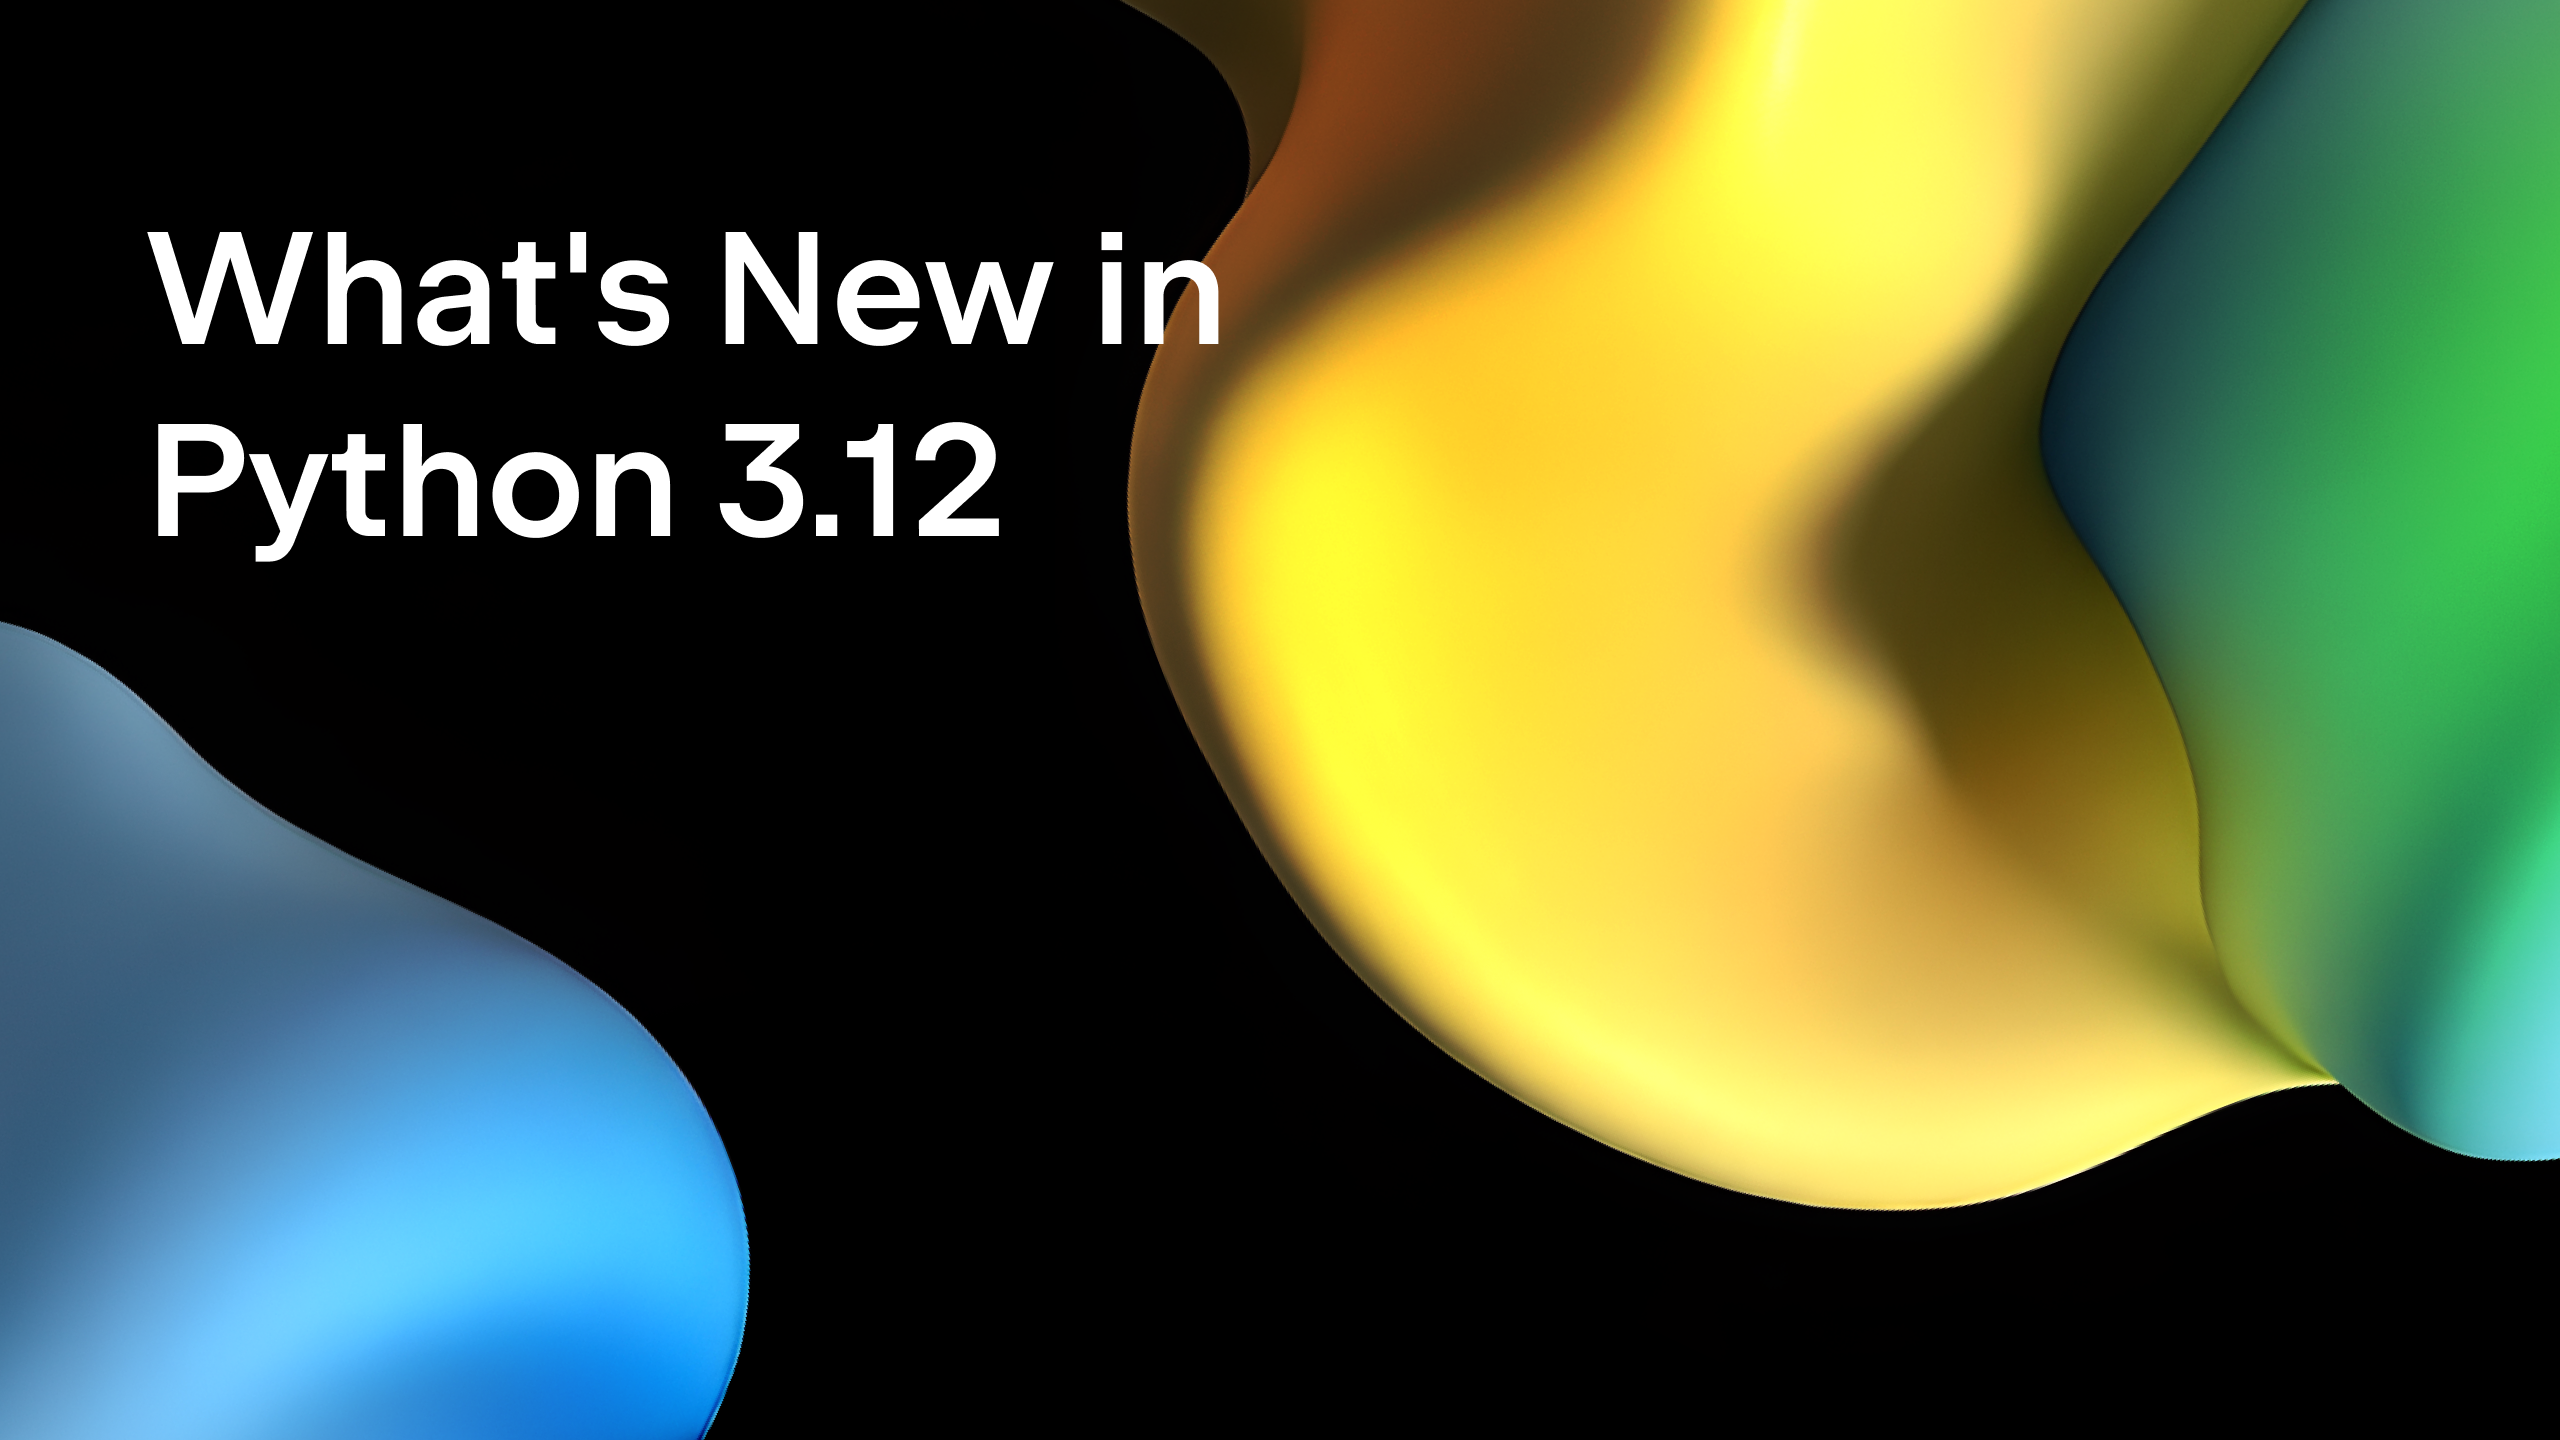 What's New in Python 3.12